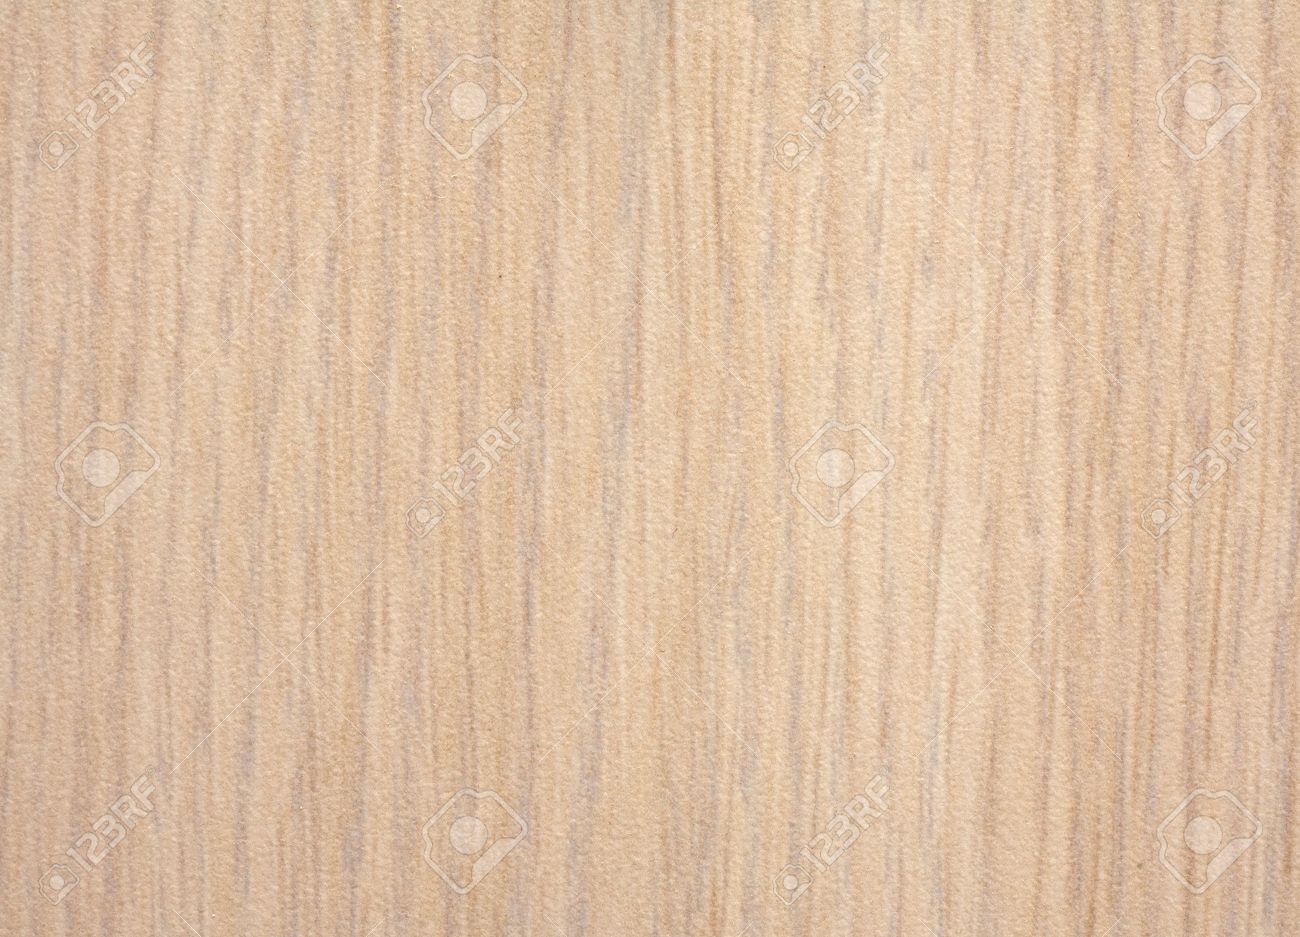 Washed Oak Formica Wood Grain Textured Background Pattern Stock